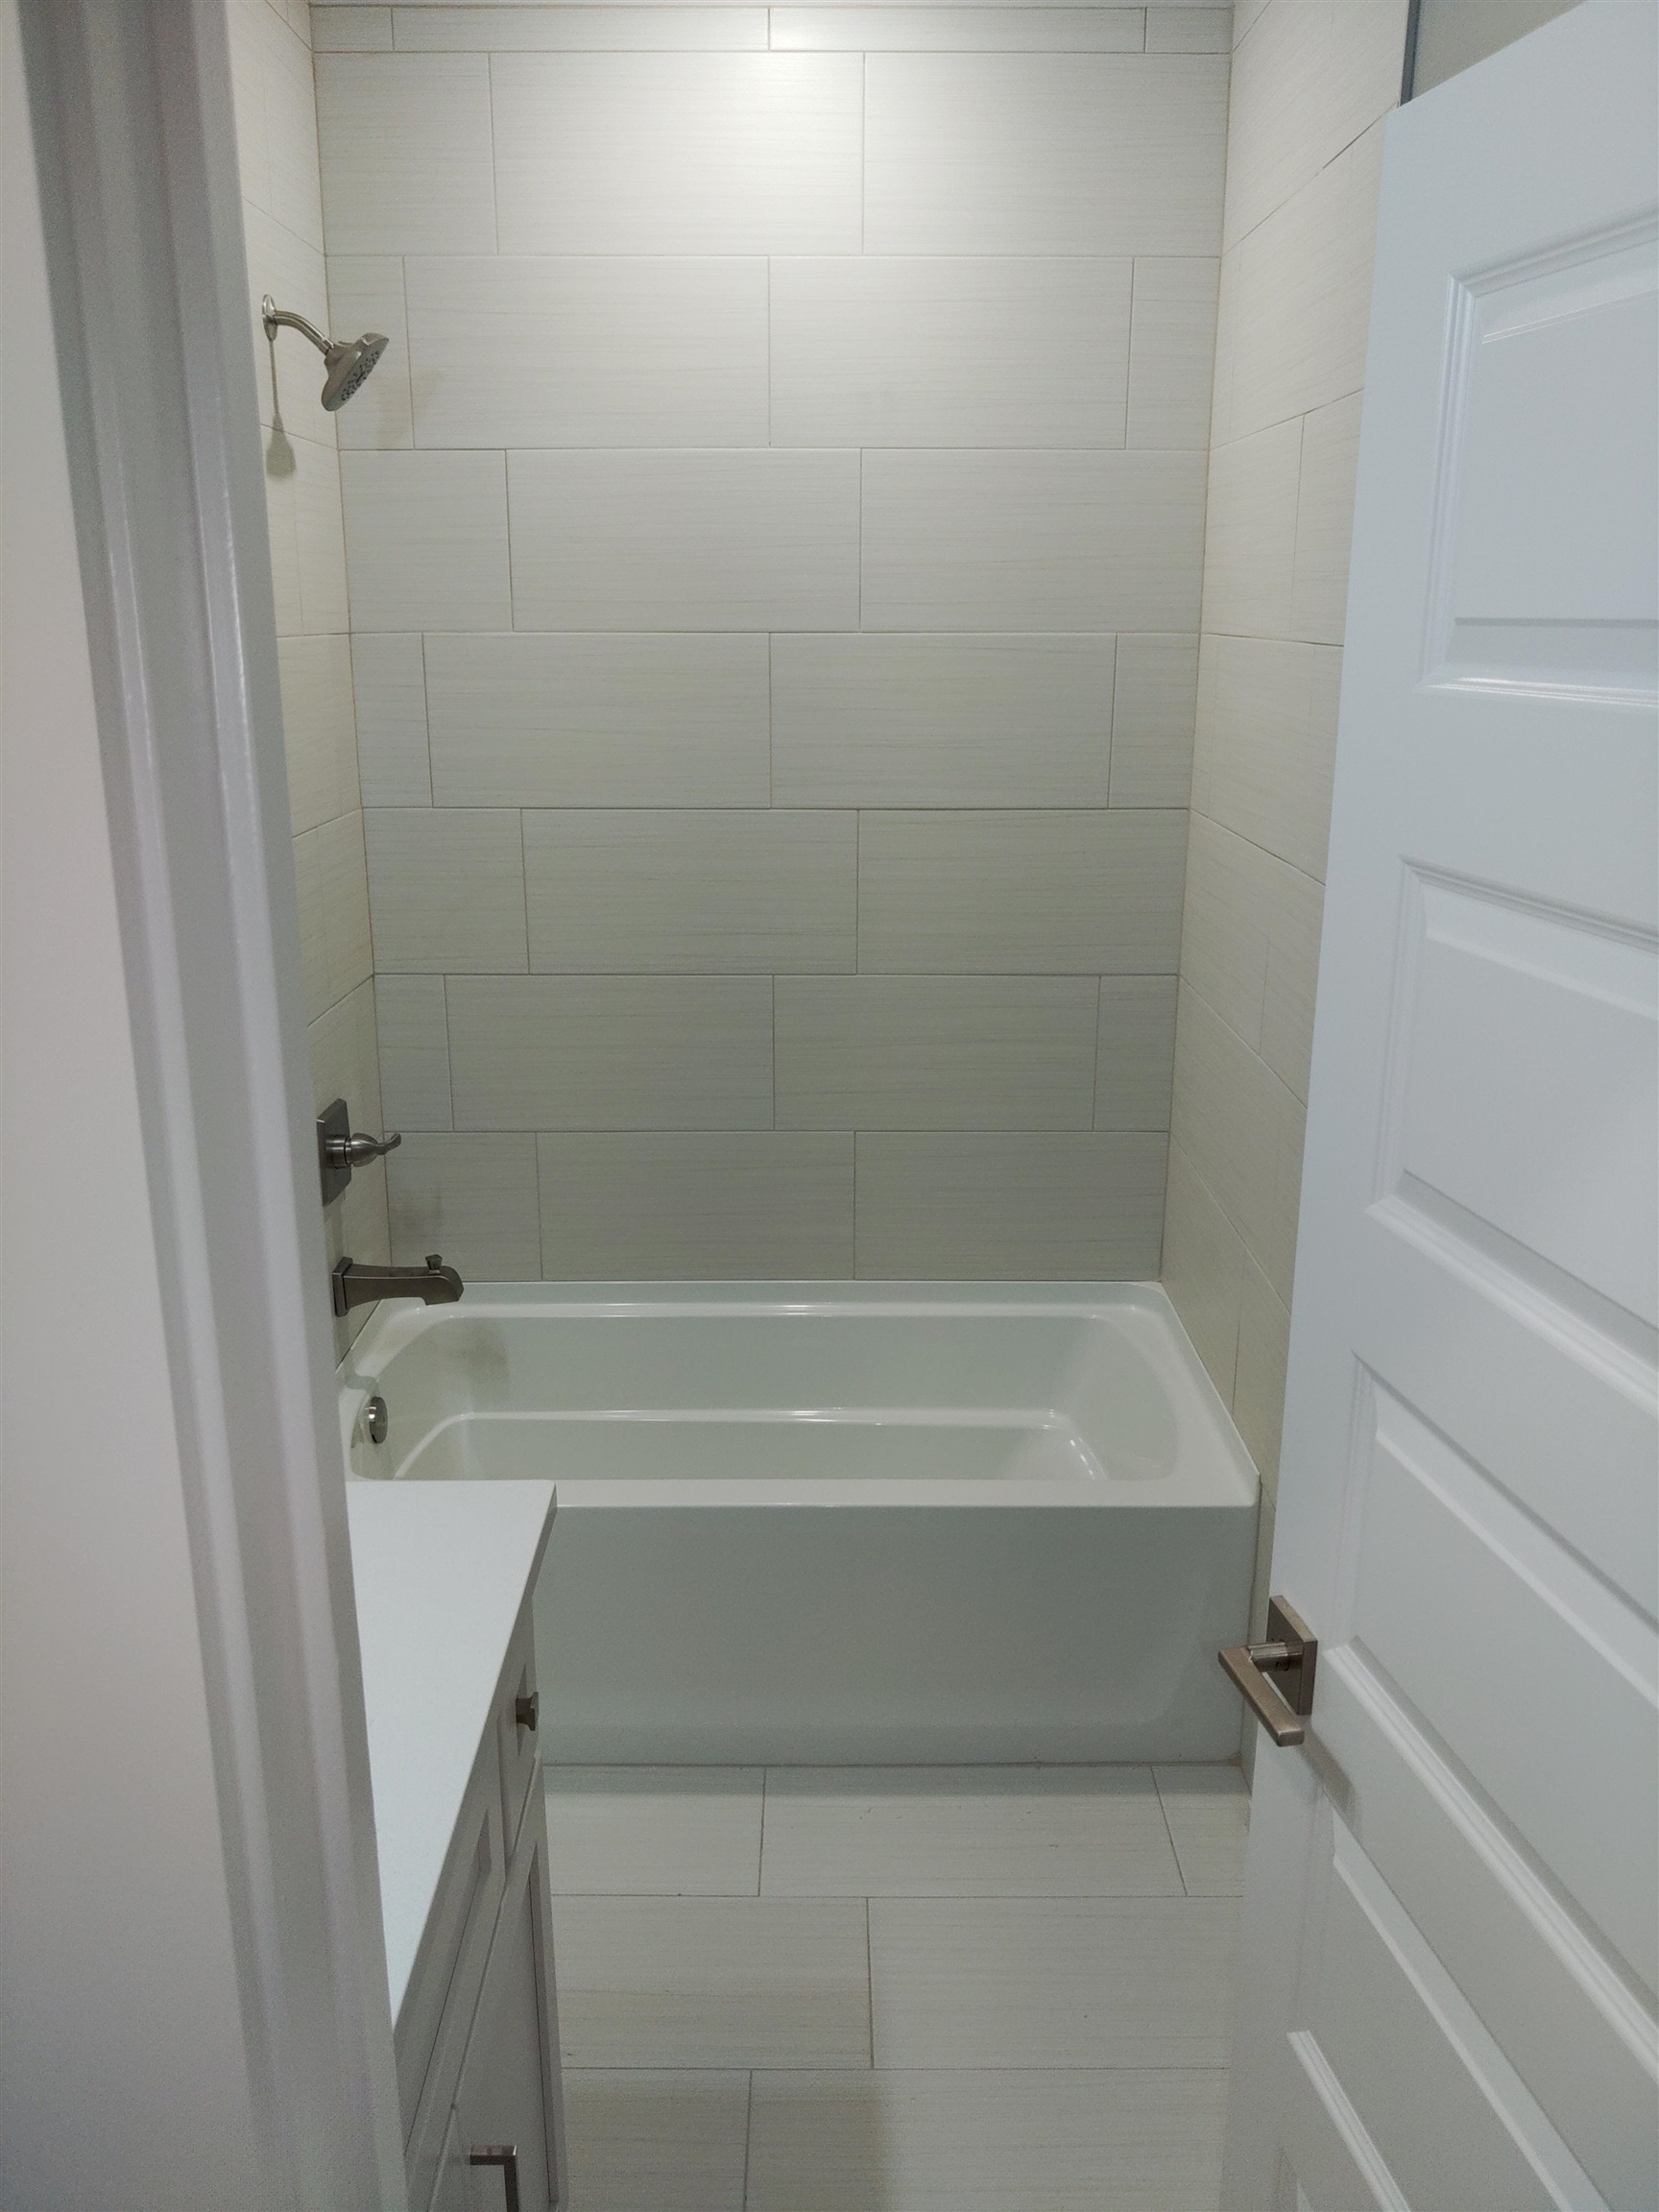 Full bath located between Bedrooms 2 and 3